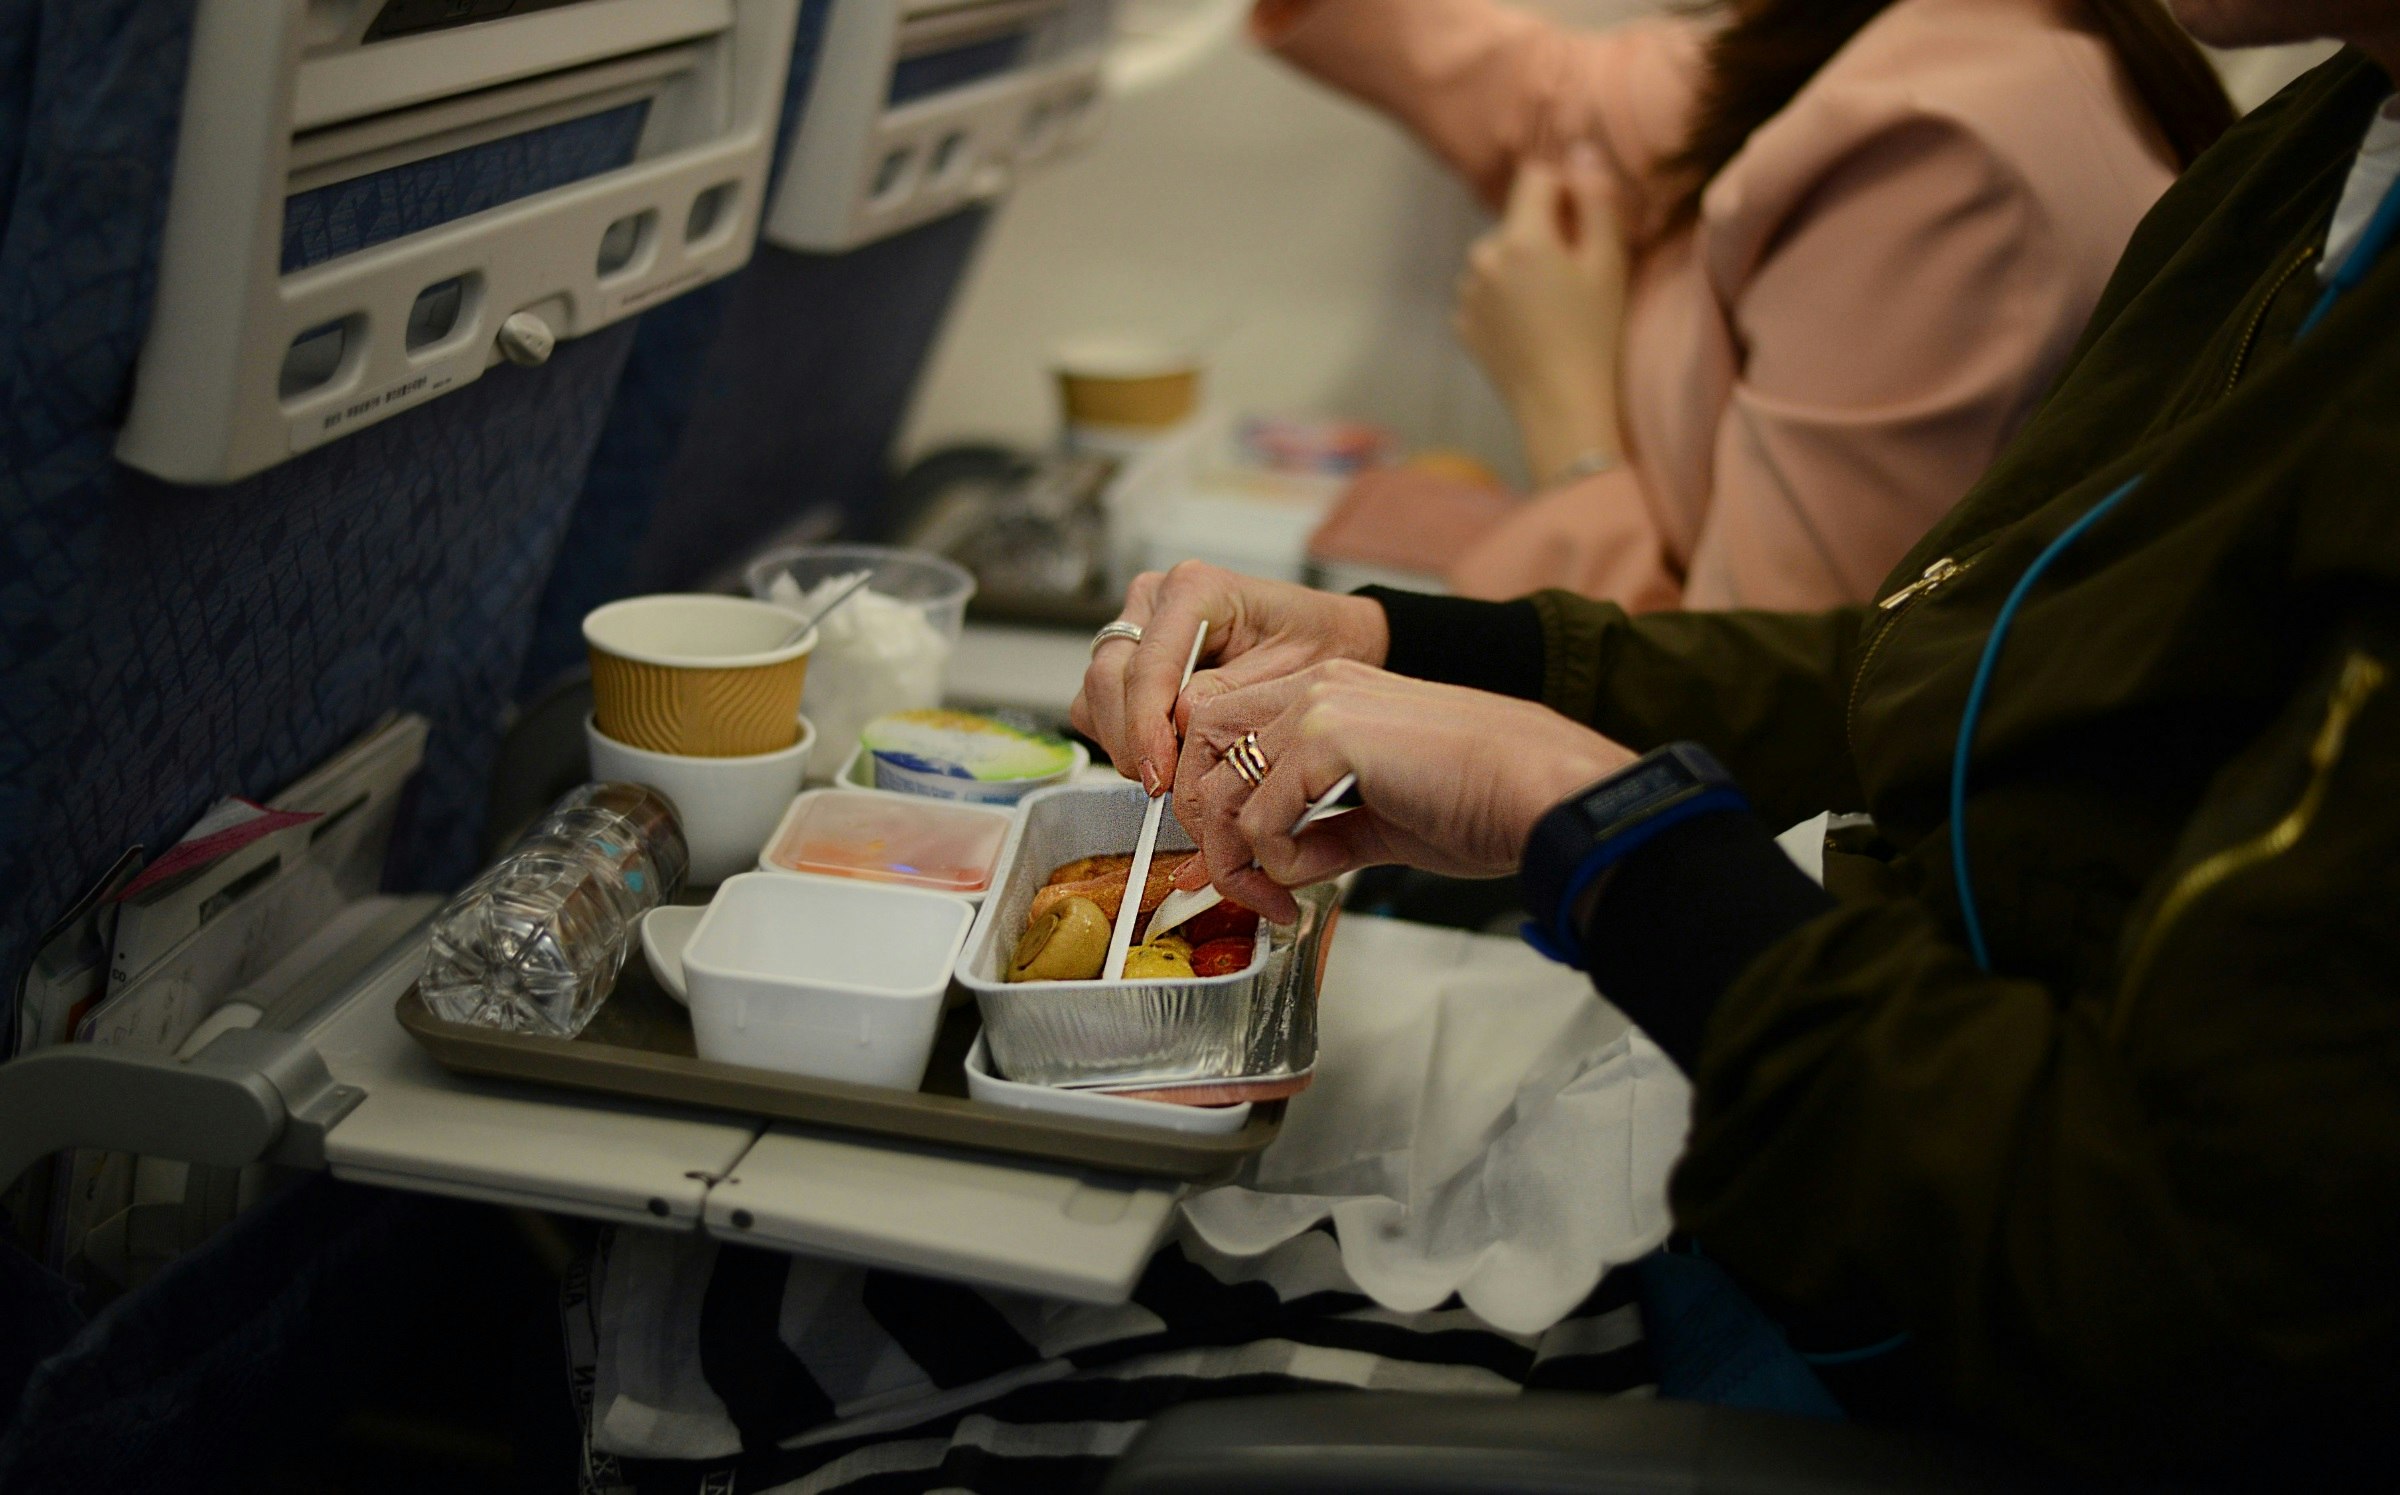 A passenger in economy class starts eating their plane food. The tray is full of plastic containers